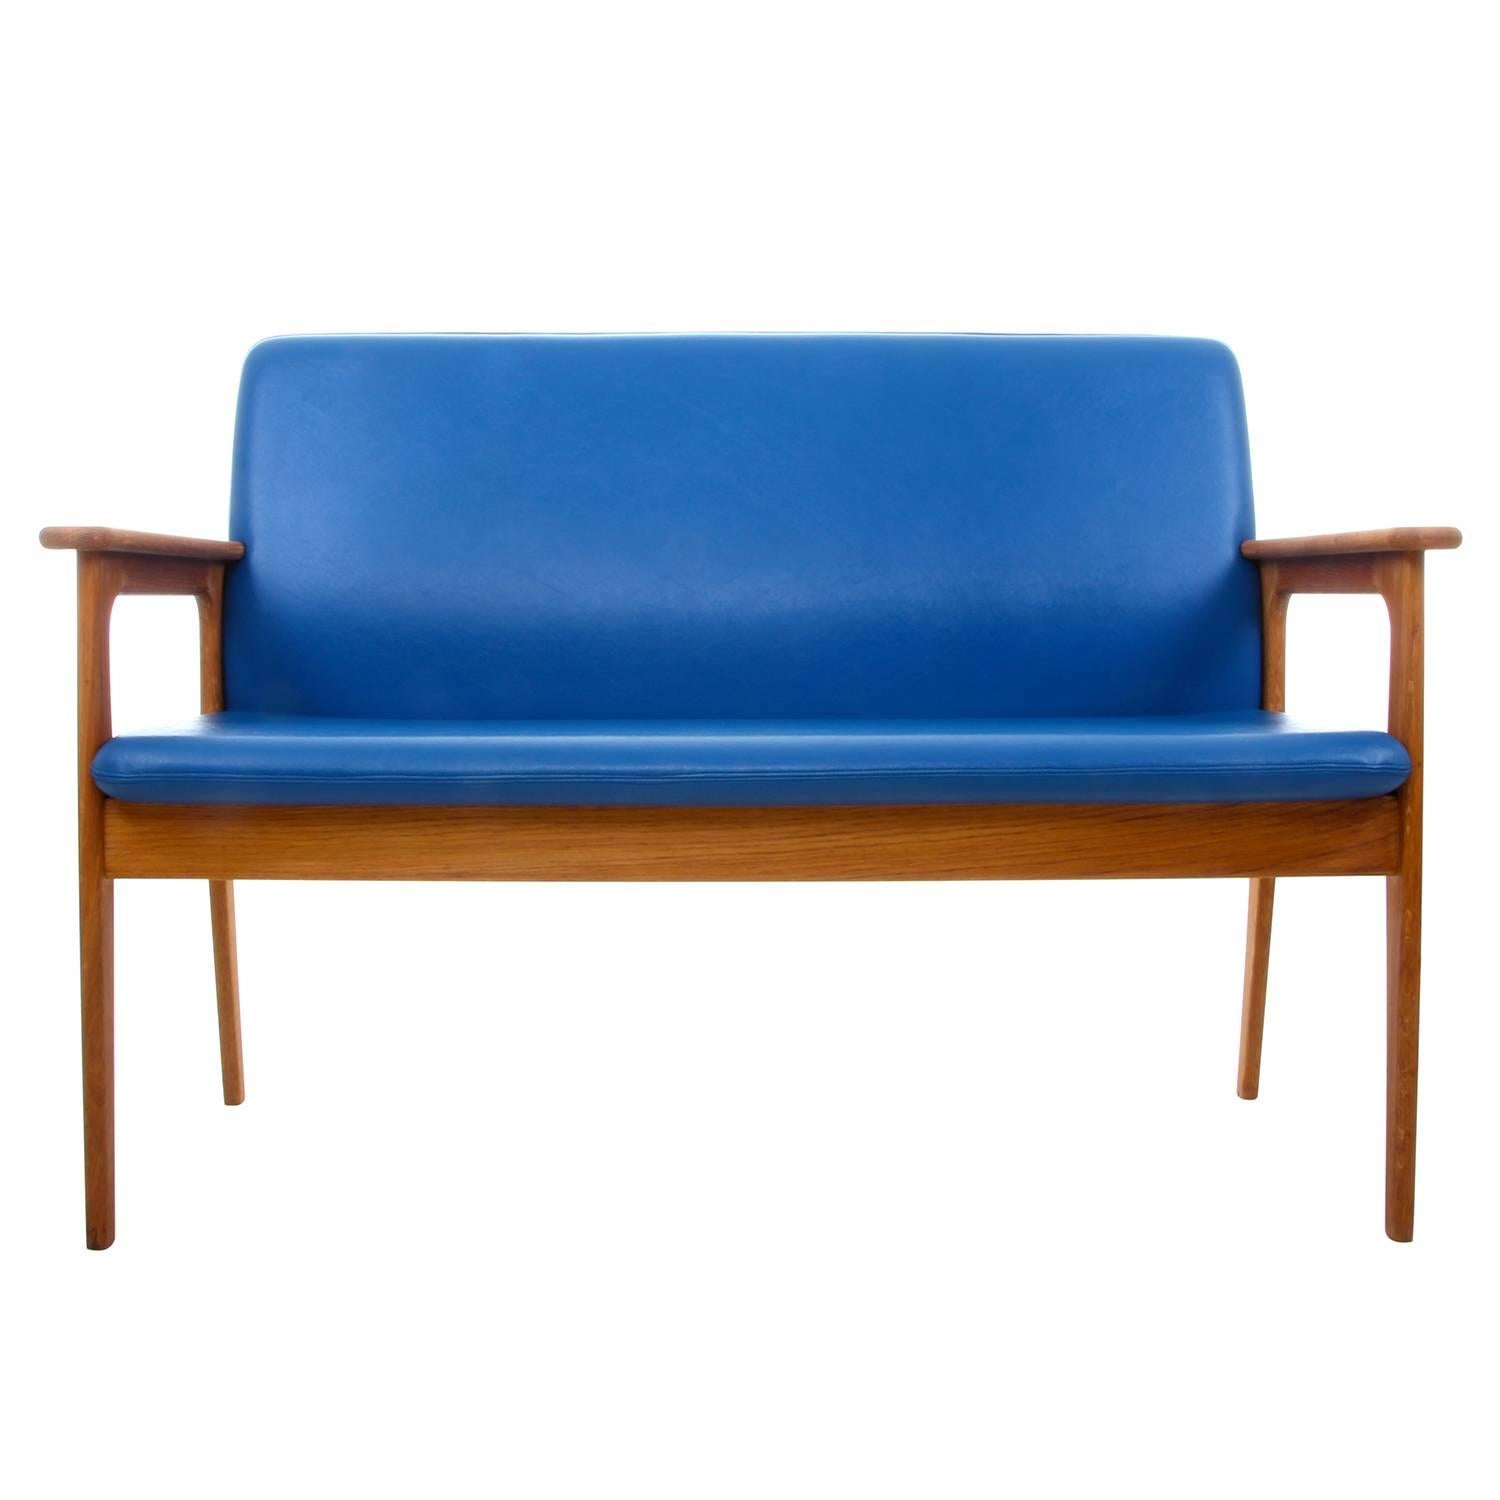 Two-seat sofa by Erik Buch, 1970s, elegant oil-treated oak couch with the original clear blue upholstery produced at O.D. Møbler - all in very good vintage condition.

Gorgeous two seat sofa comprised of oak frame with armrests, oil-treated which